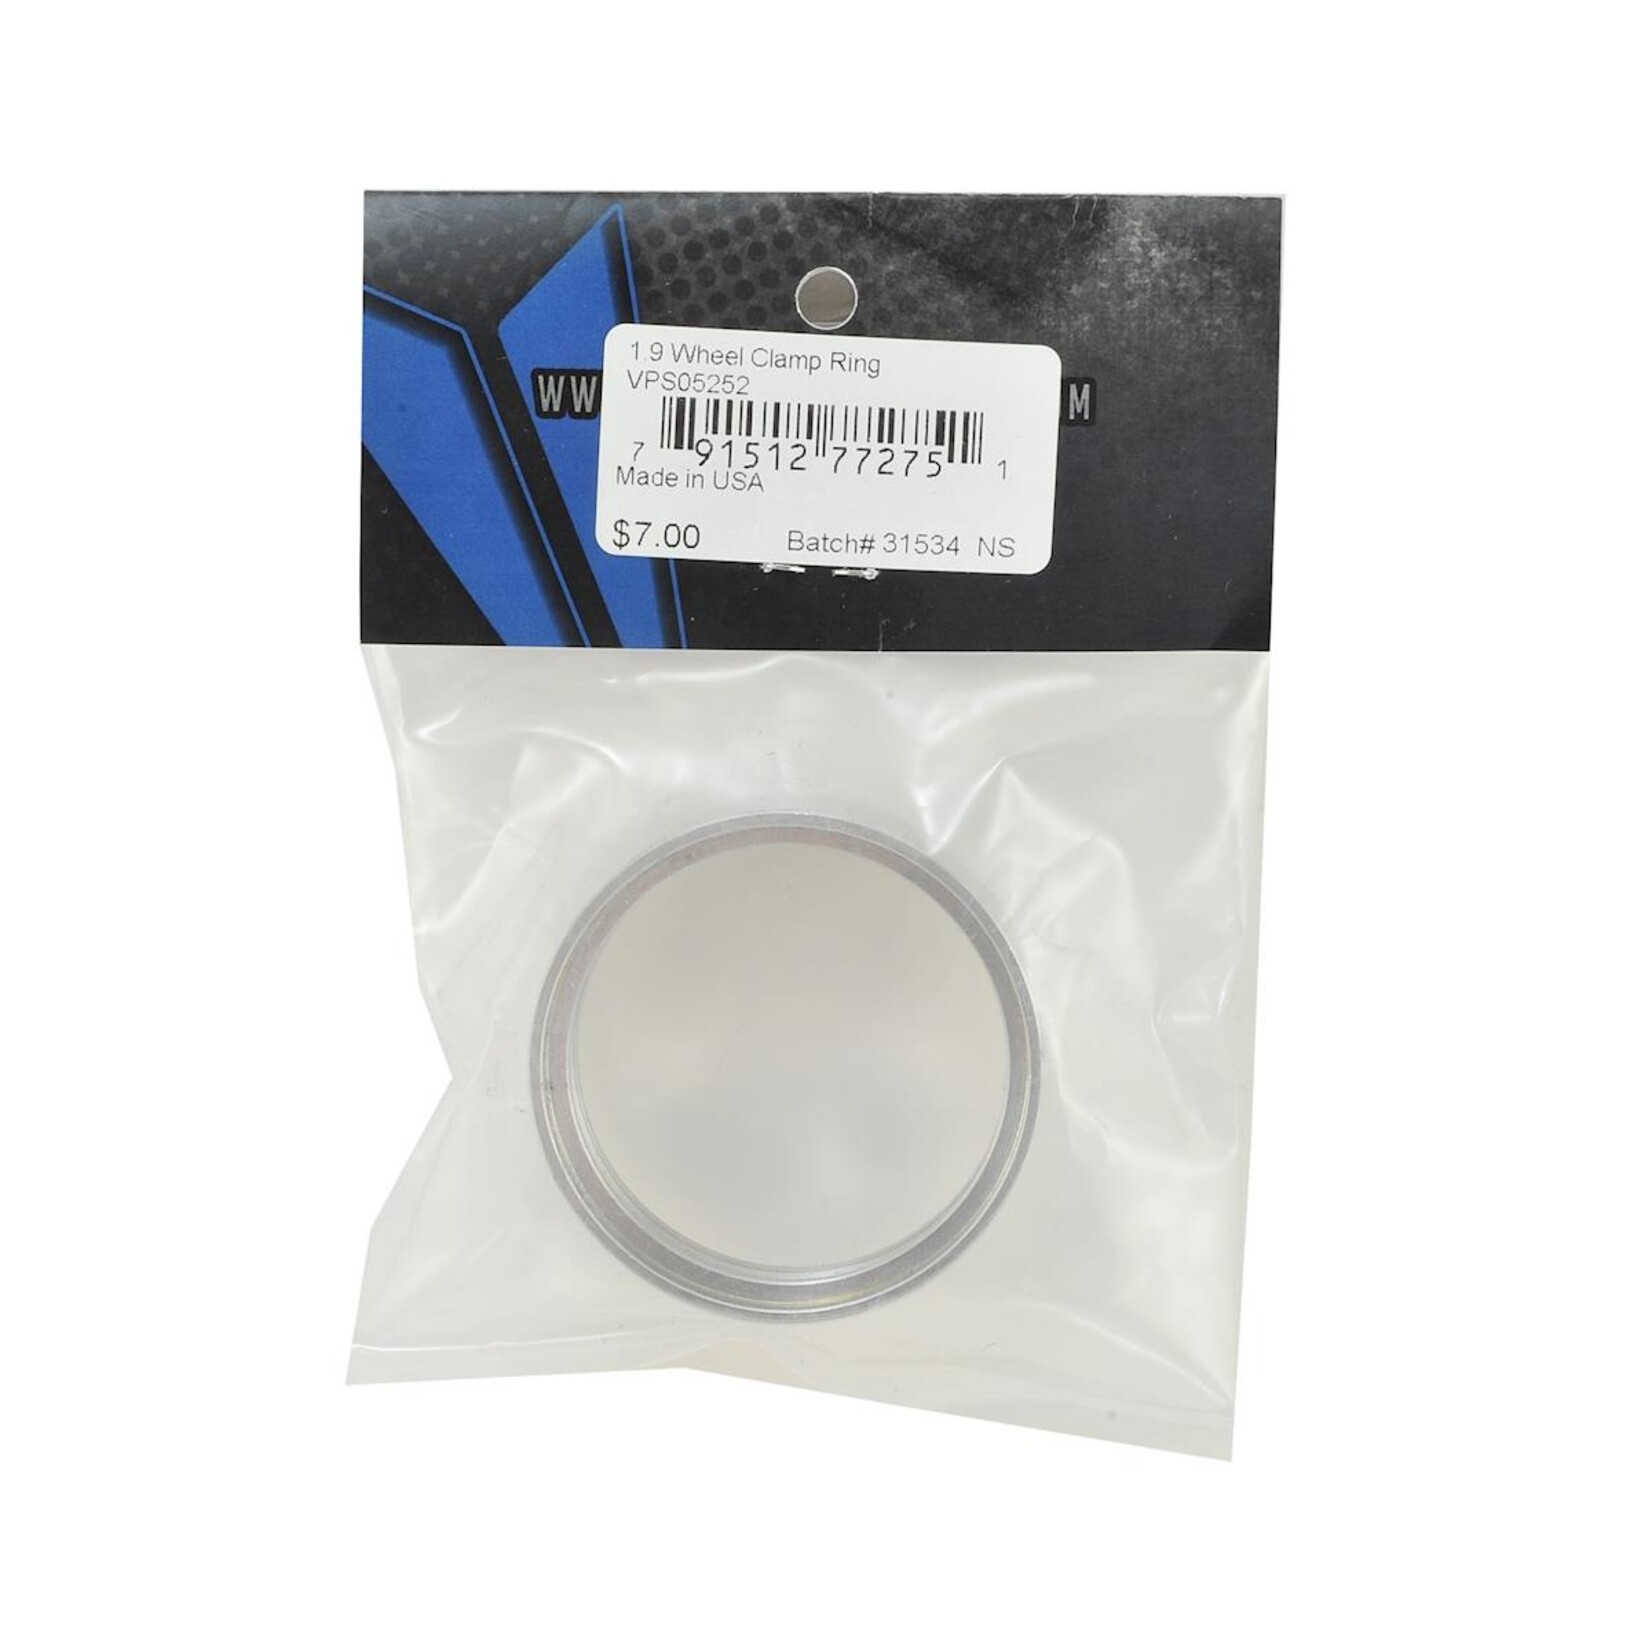 Vanquish Products Vanquish Products 1.9" Wheel Clamp Ring #VPS05252